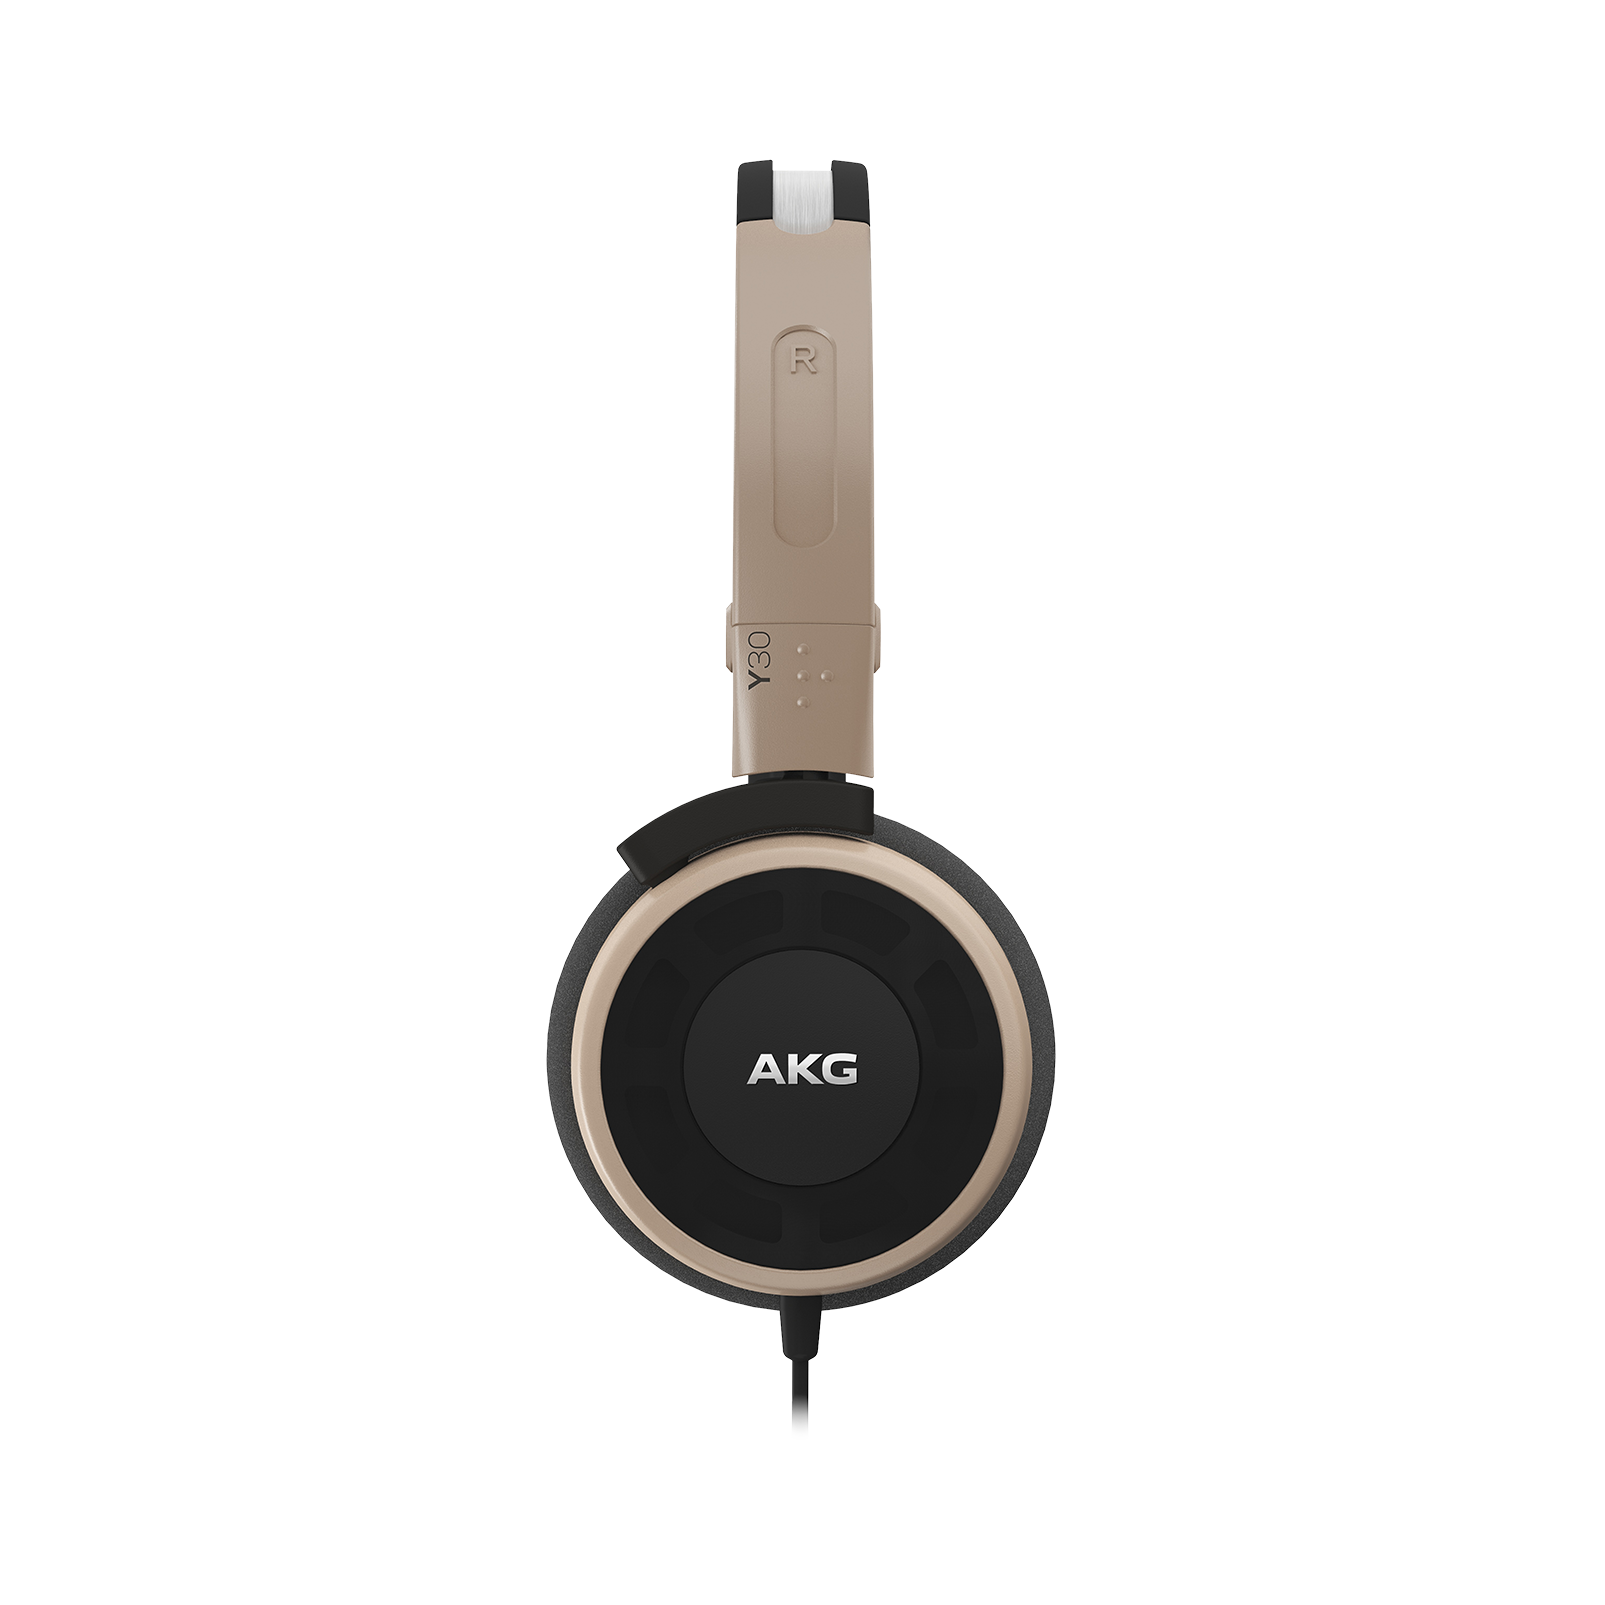 Y 30 - Brown - Stylish, uncomplicated, foldable headphones with 1 button universal remote/mic - Detailshot 1